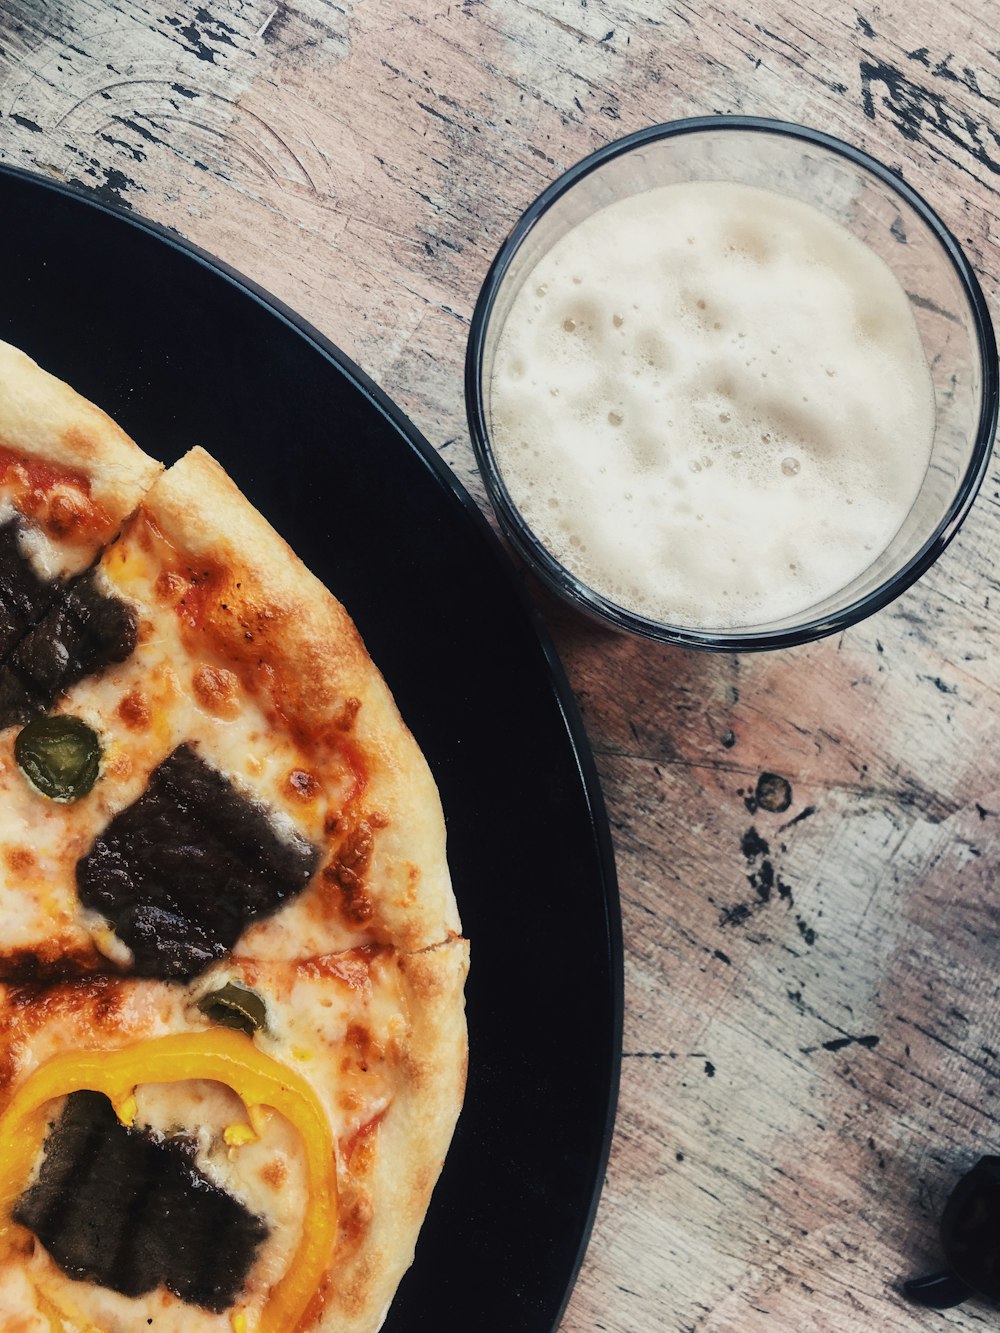 a pizza sitting on top of a black plate next to a glass of beer